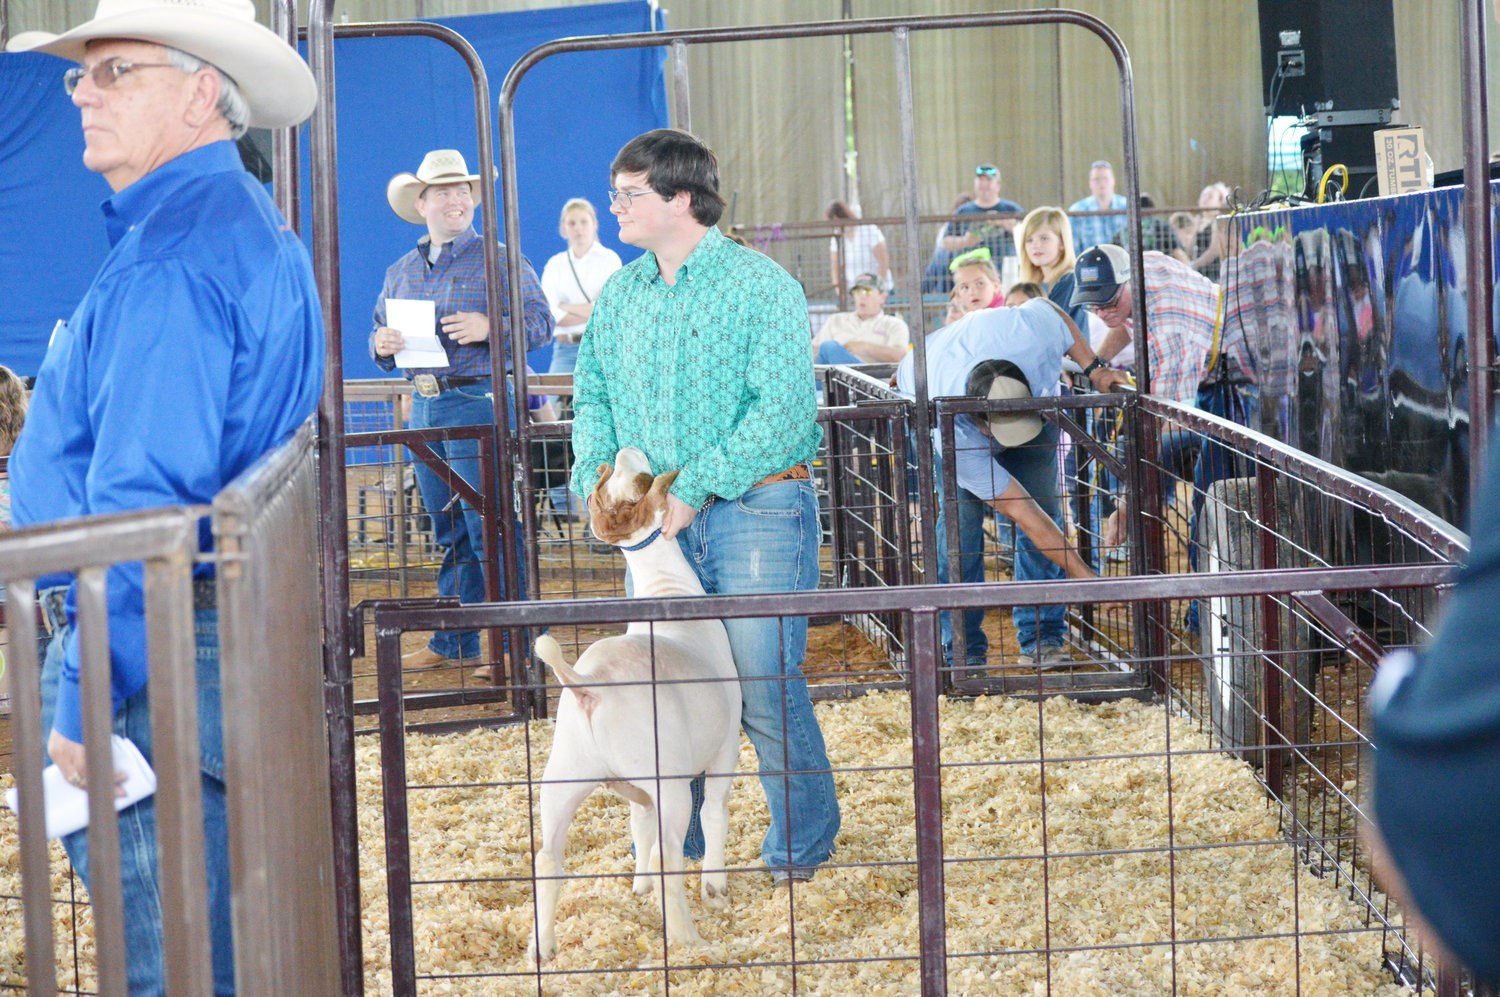 Koerth Ragsdale, Alba-Golden FFA, took home the Grand Champion award for his goat.  (Monitor photos by Larry Tucker)